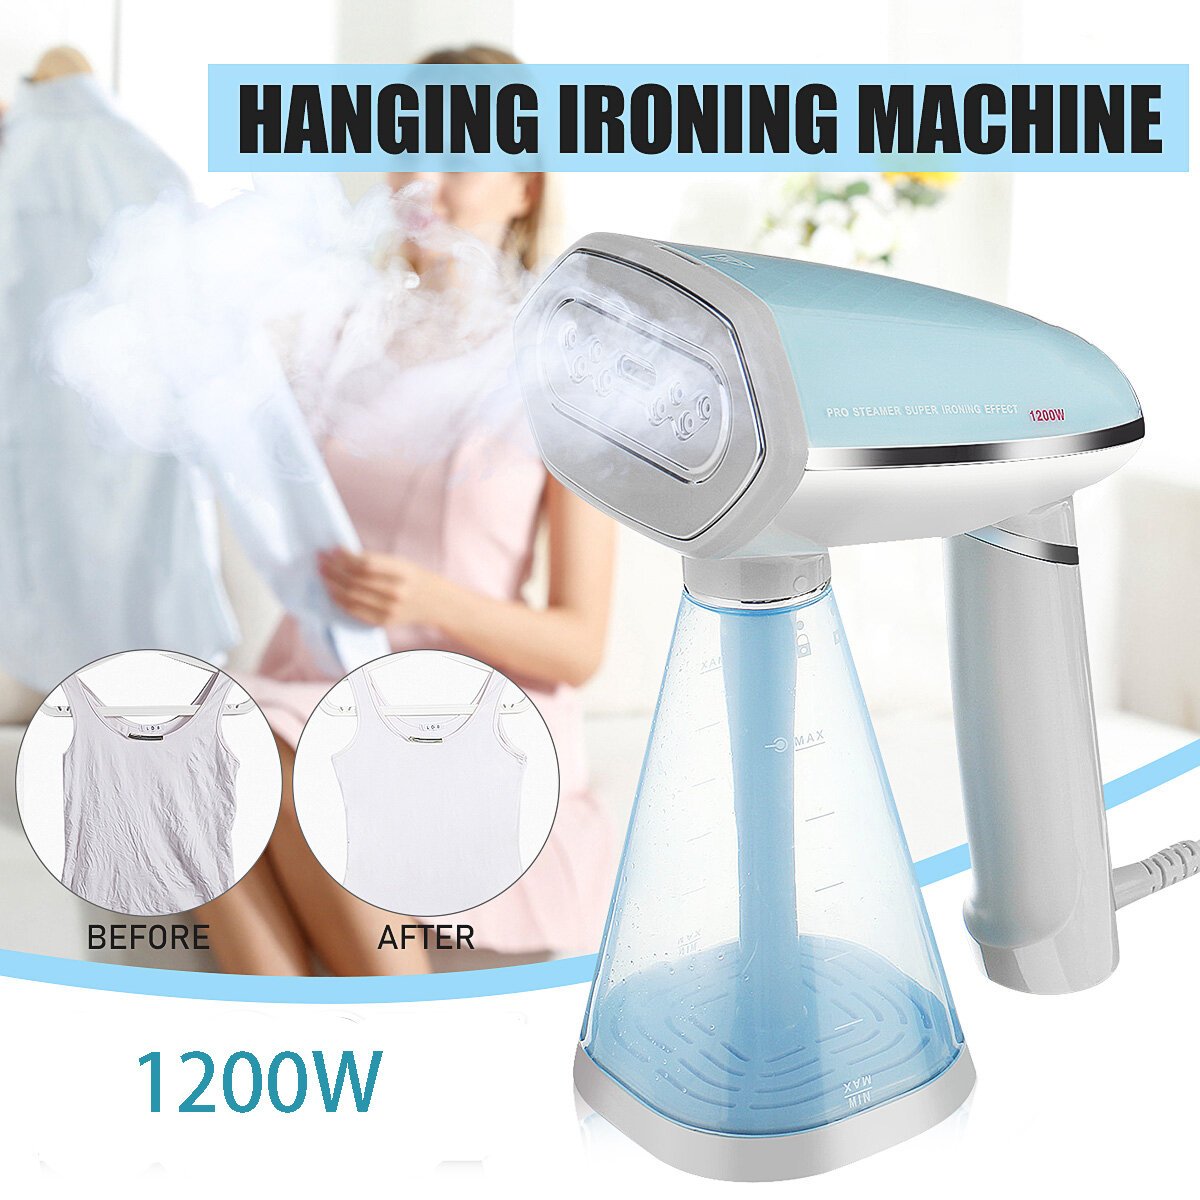 Handheld Portable Garment Steamer Powerful Clothes Steam Iron Fast Heat-up Fabric Wrinkle Removal 350ml Water Tank for Travel Home Dormitory